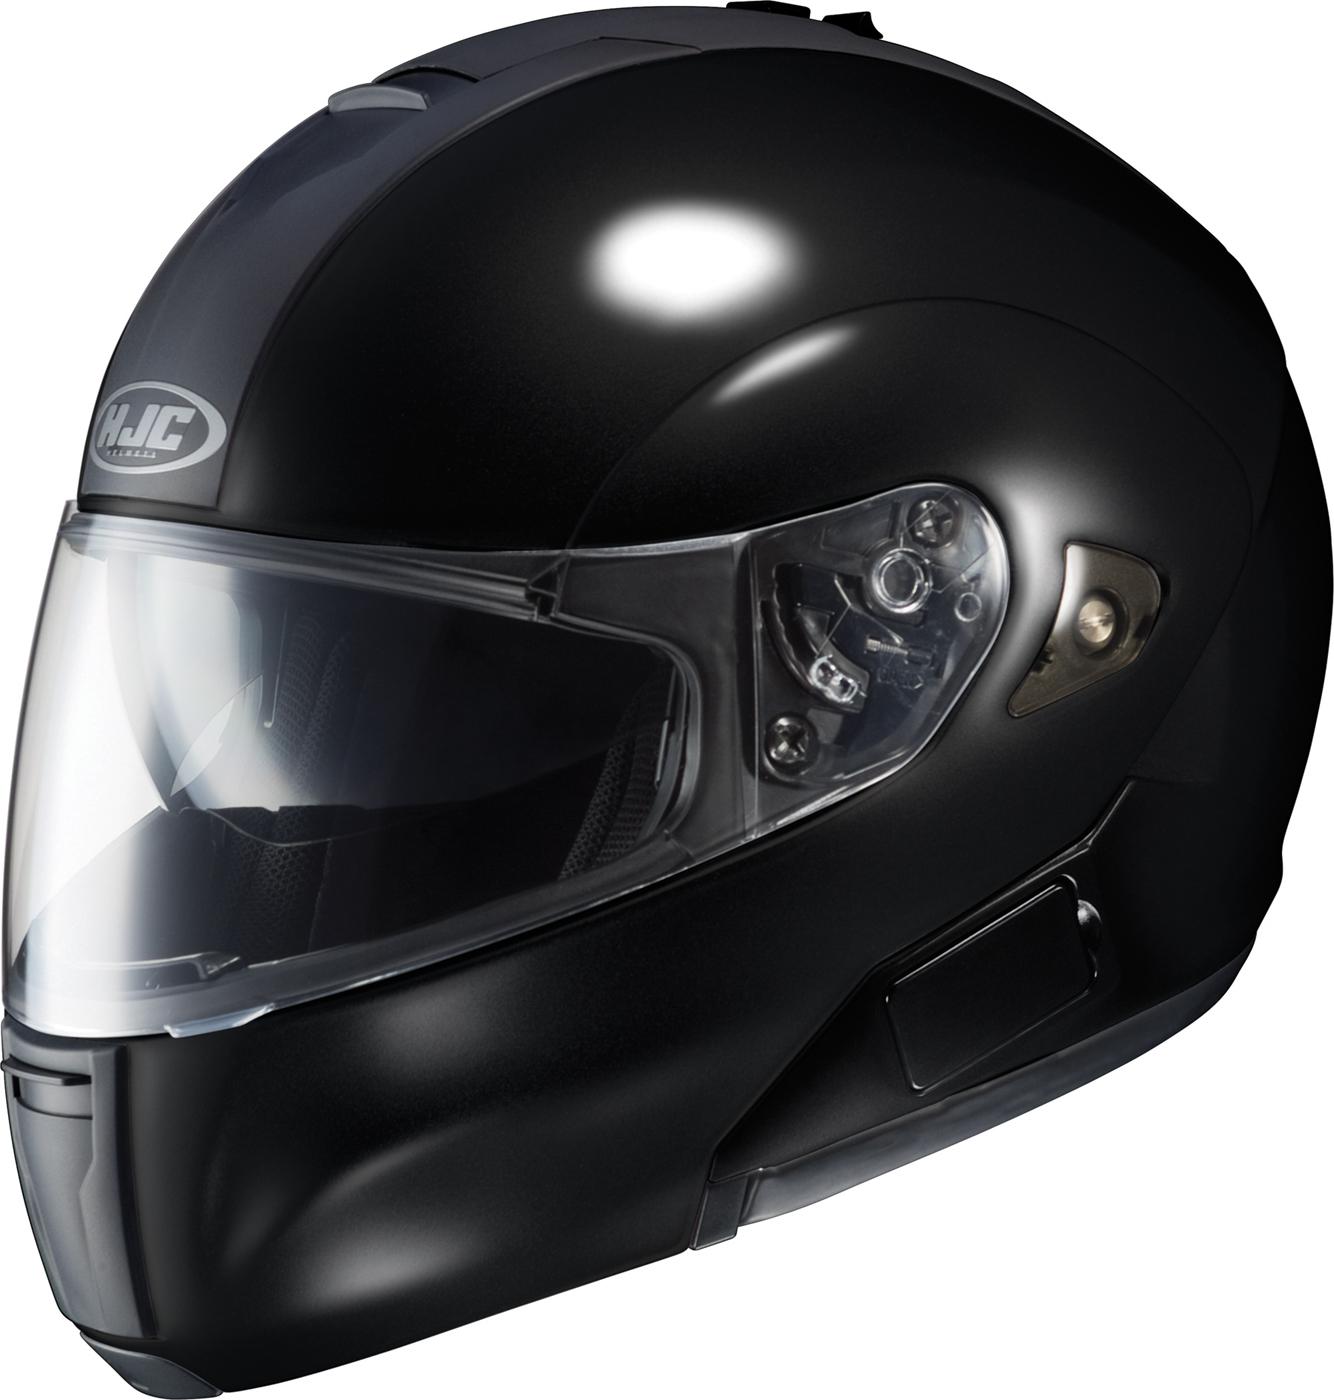 Hjc is-max bt bluetooth black full-face motorcycle helmet size small